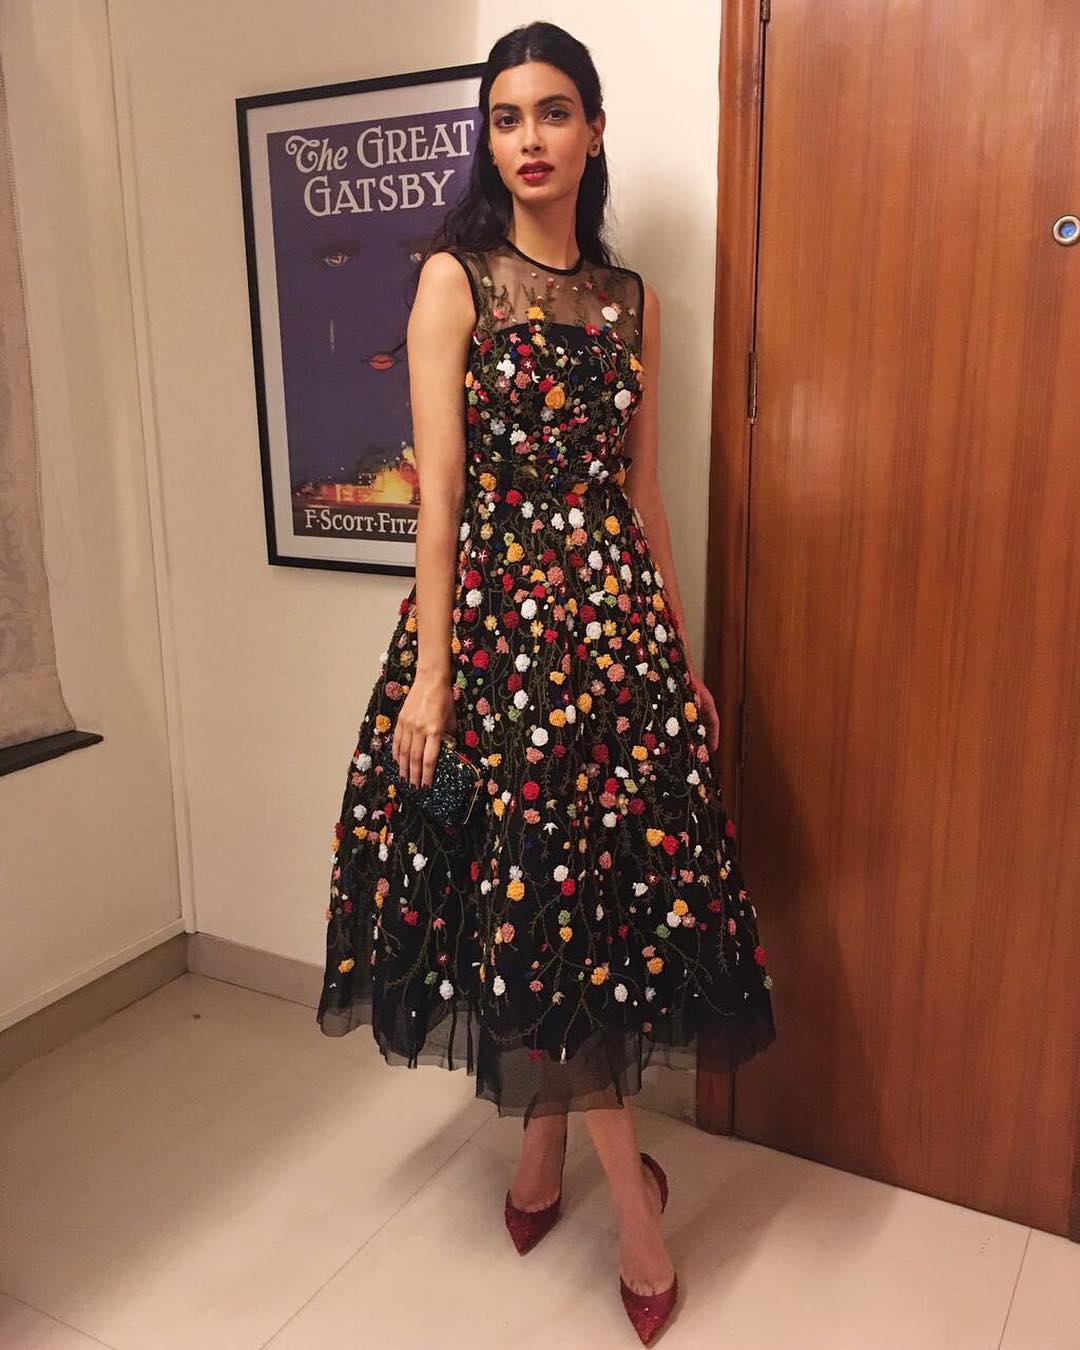 Diana Penty Looked Like A Colorful Walking Garden In Floral Dress From From Huemn